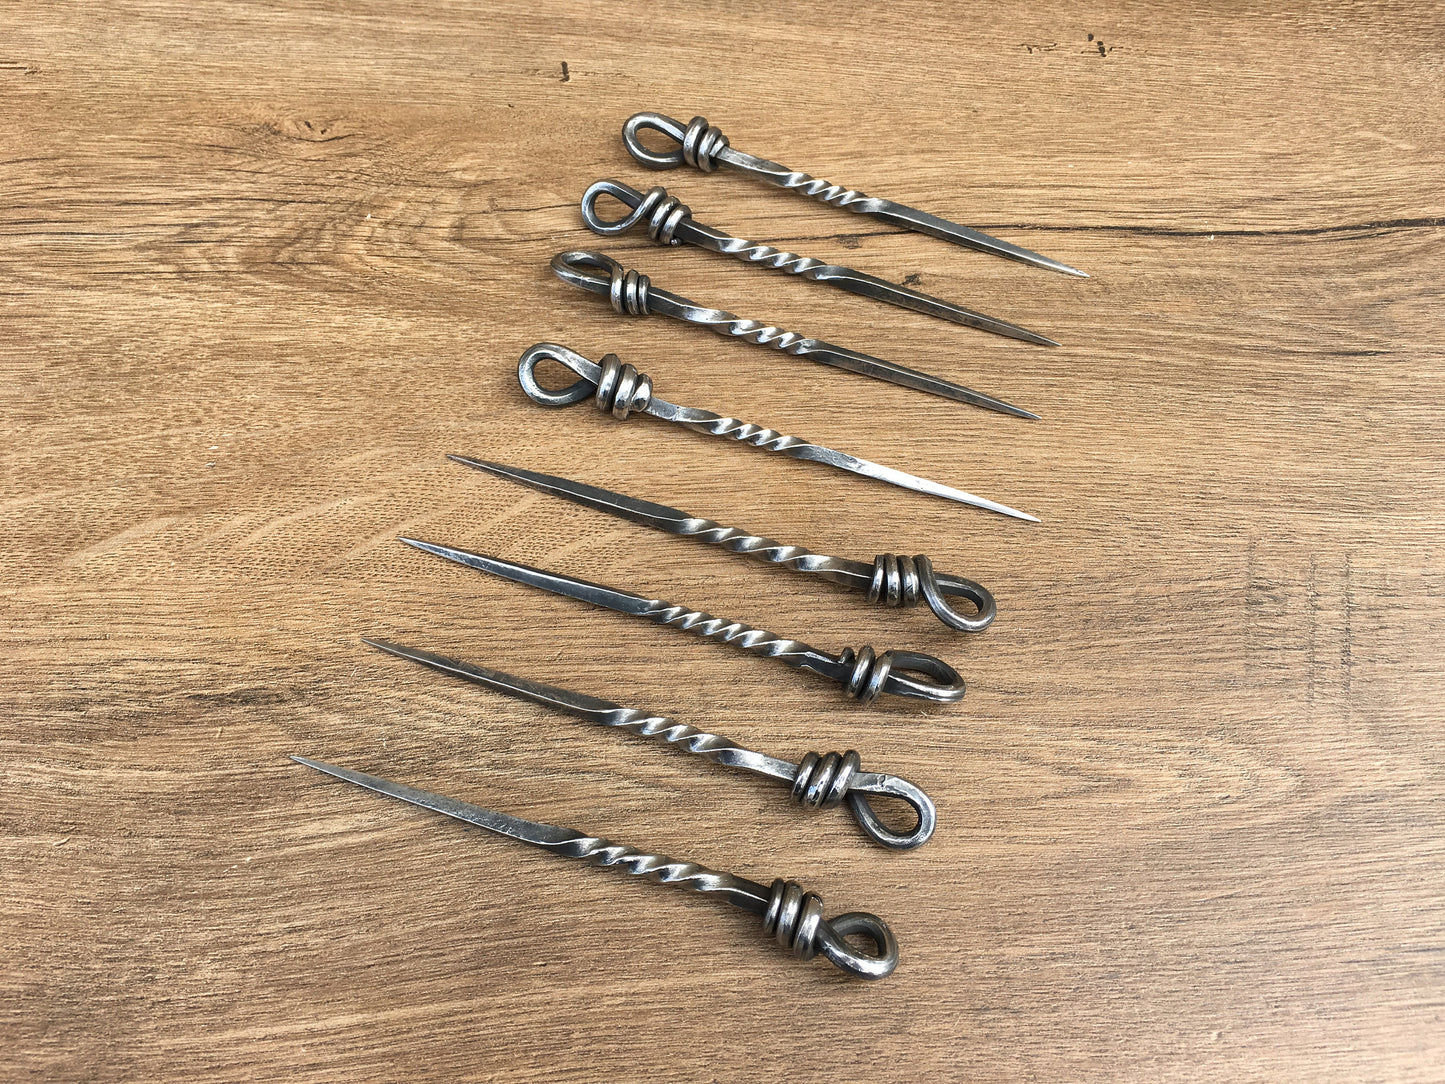 Food pricker, viking cutlery, stainless steel viking skewers, medieval kitchen, middle ages, reenactment, grill tools, camp equipment,viking